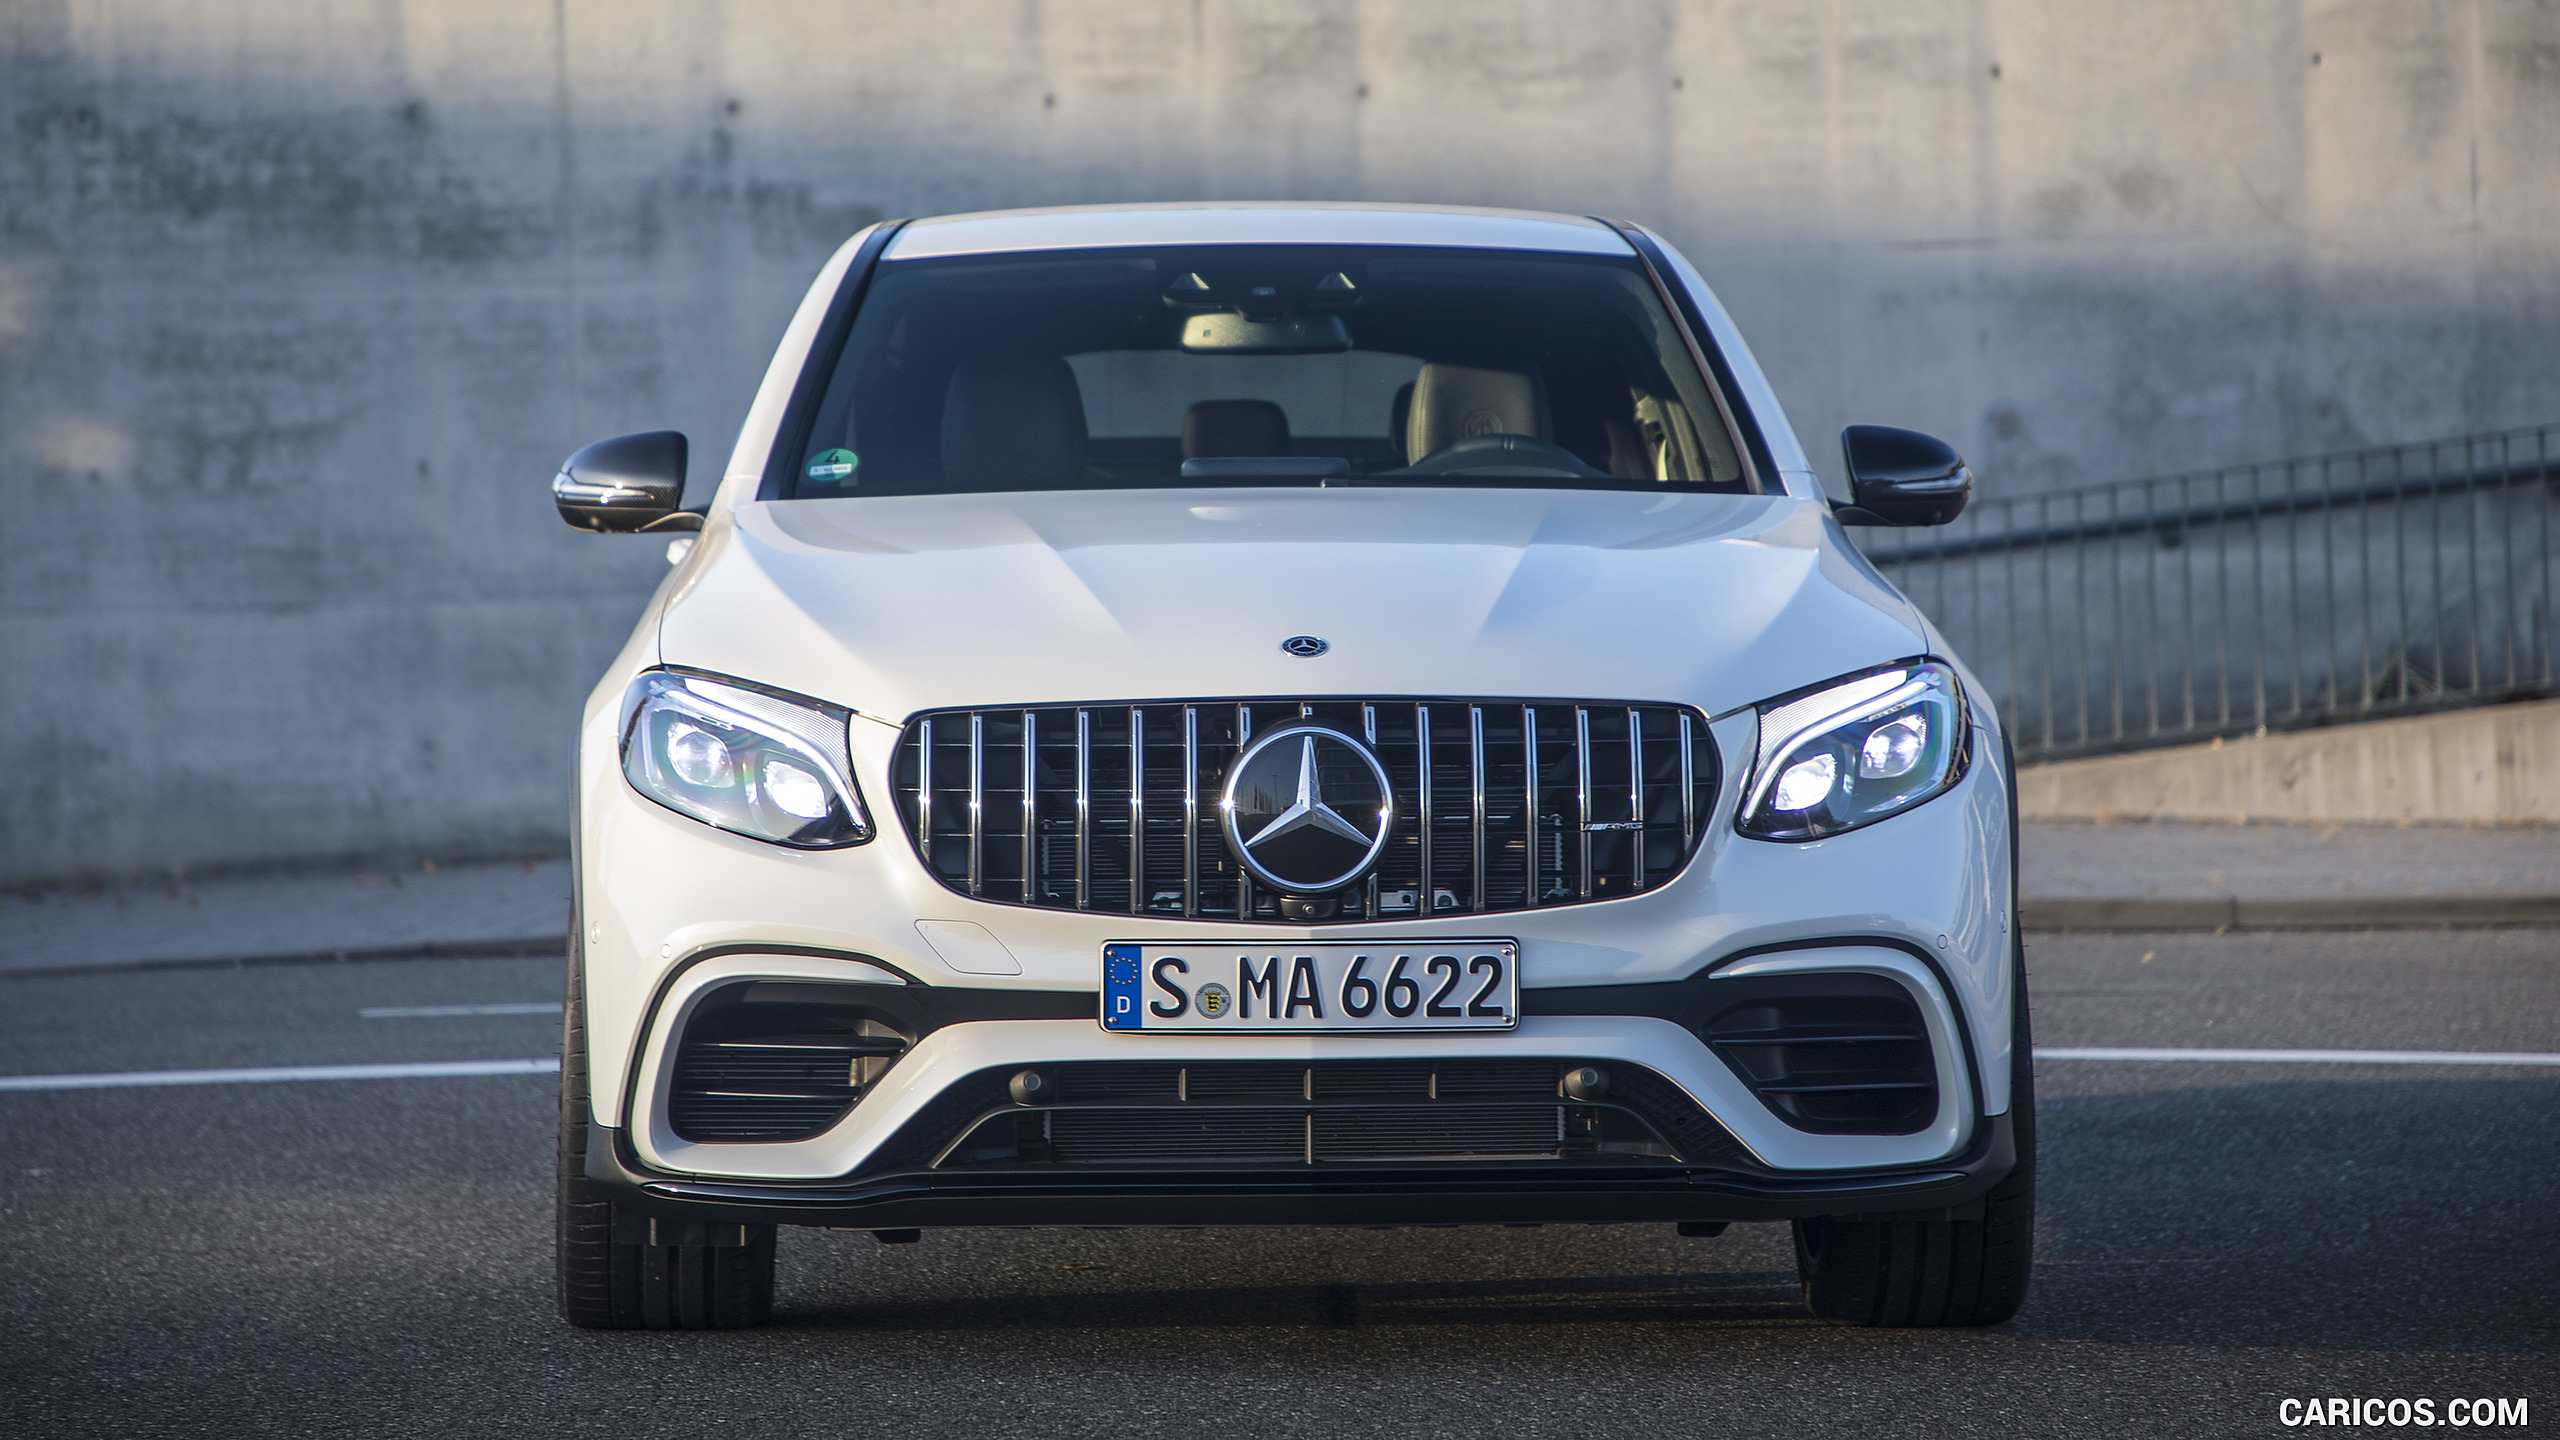 2018 Mercedes-AMG GLC 63 S Coupe - Front, #54 of 75